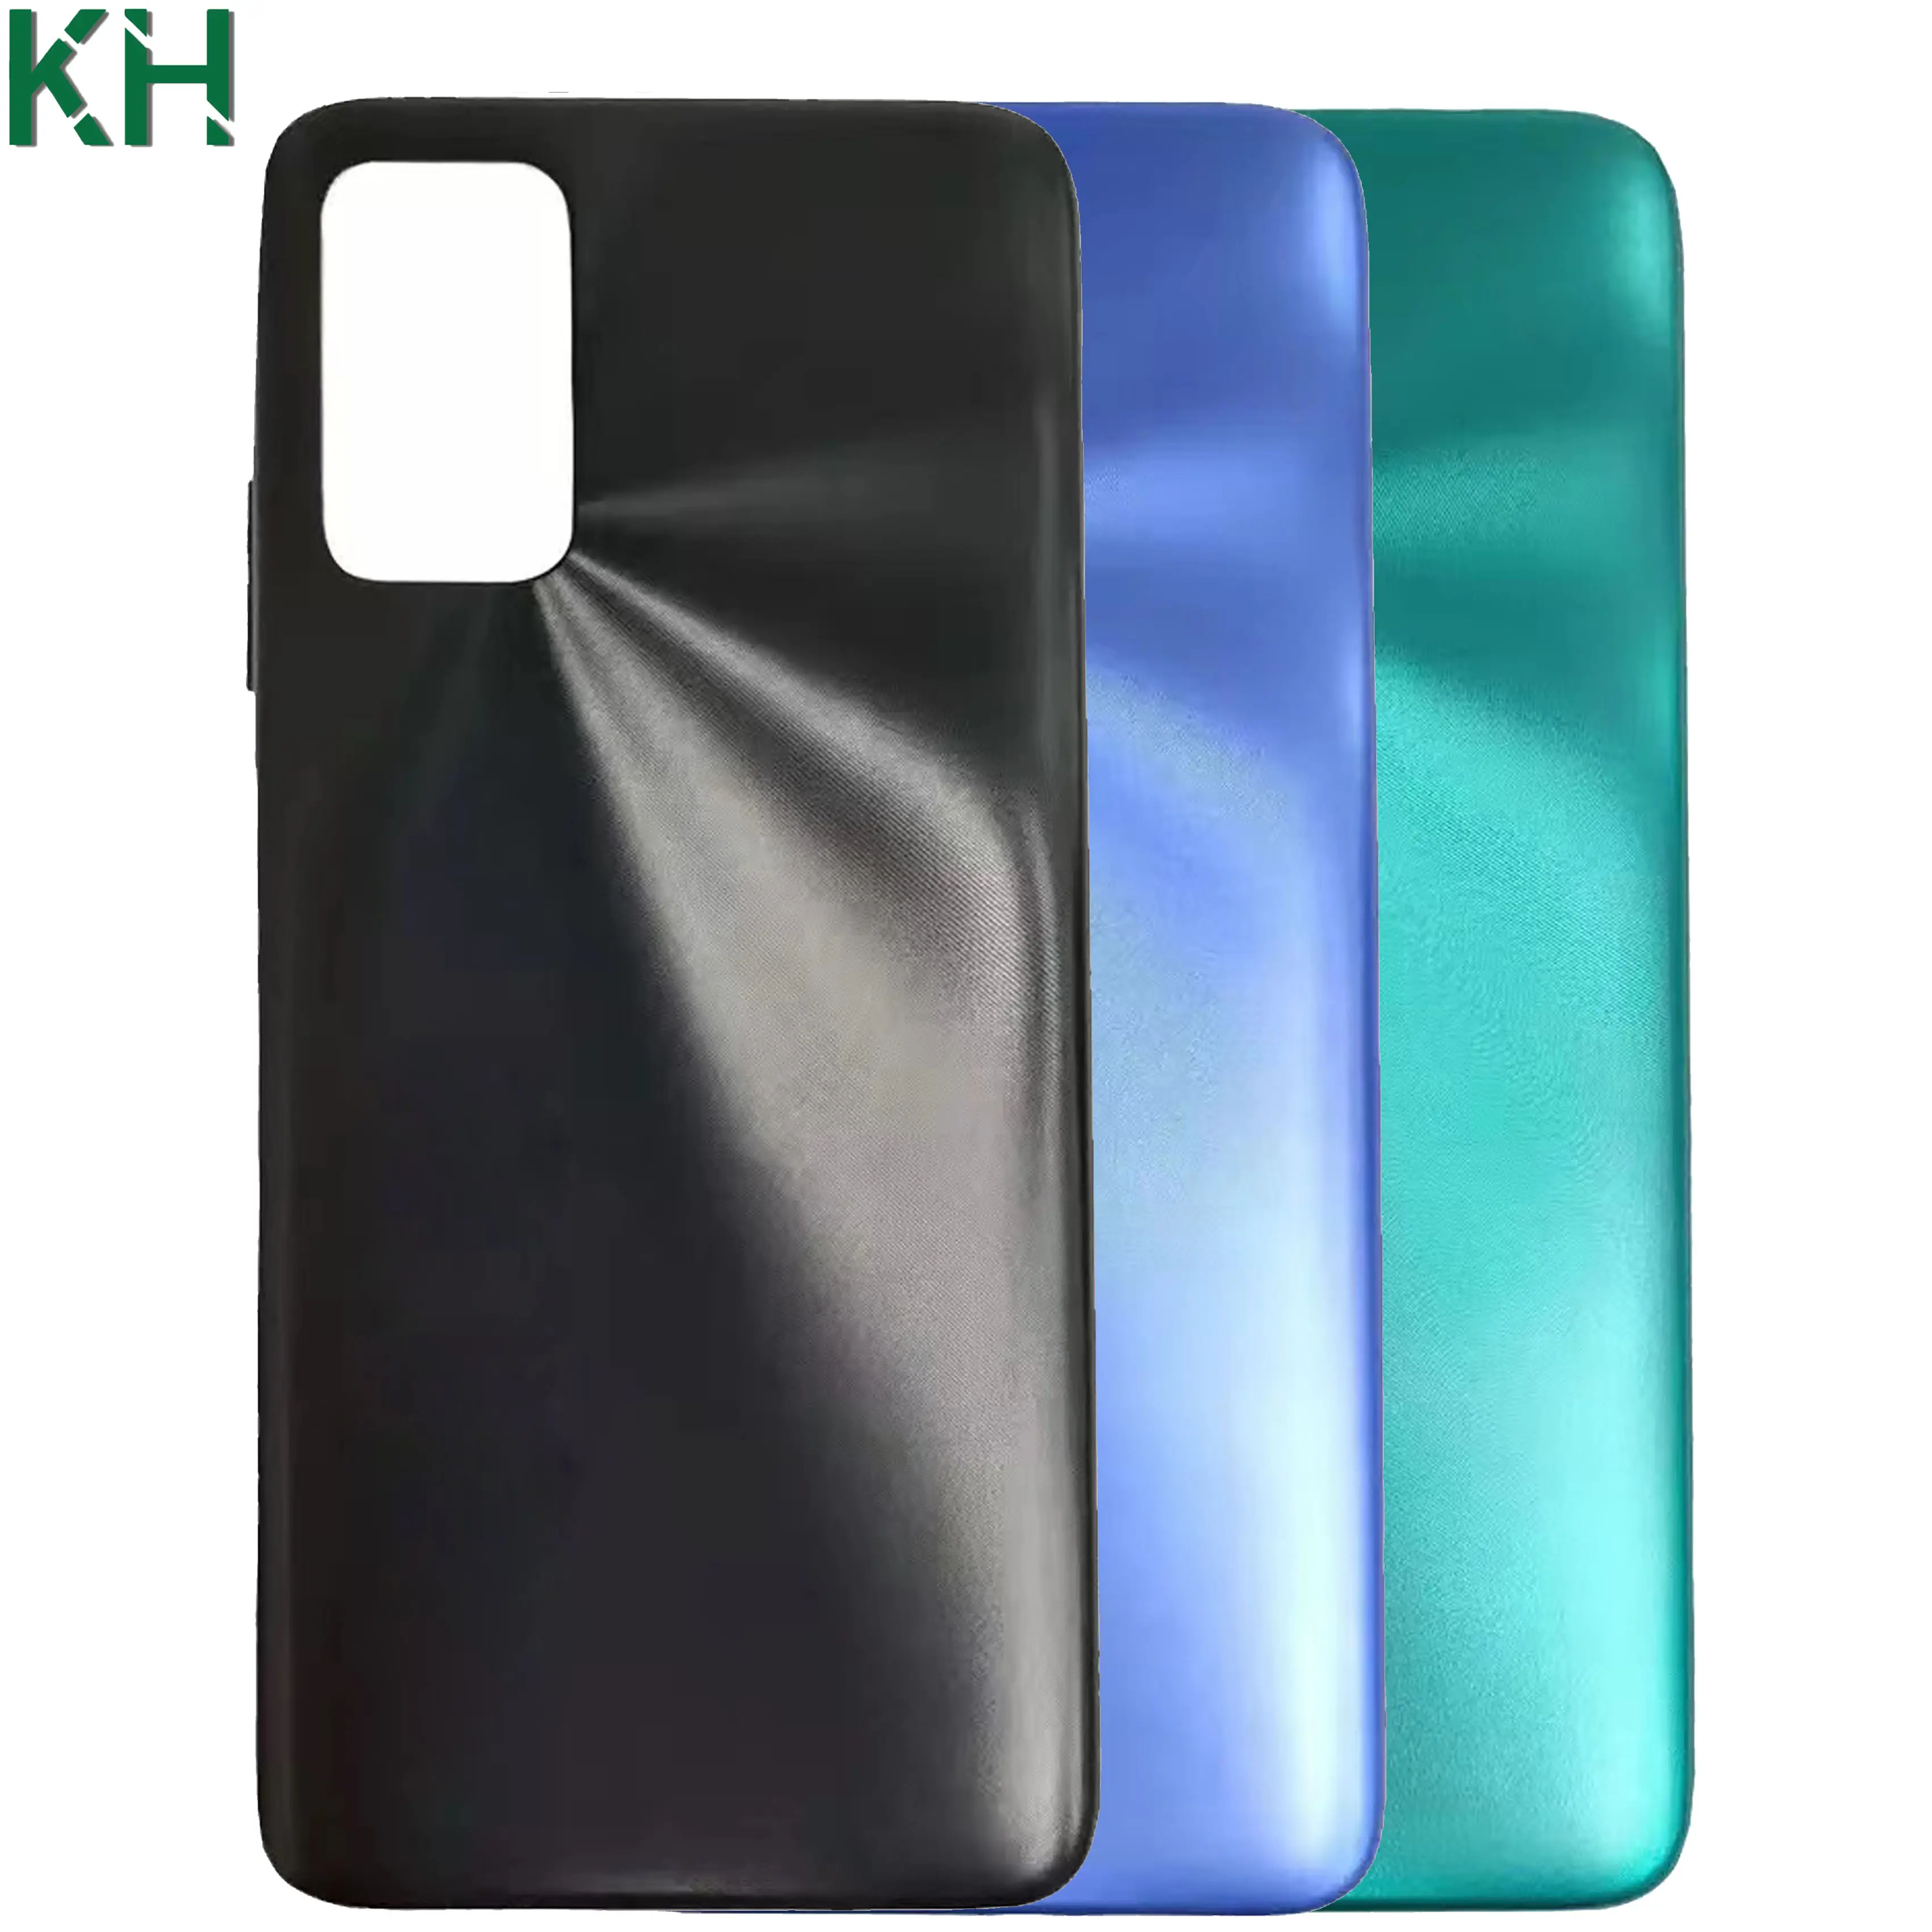 Phone Back Battery Cover For Redmi 9T Rear Case Door Housing Cover Replacement Parts With Power Key